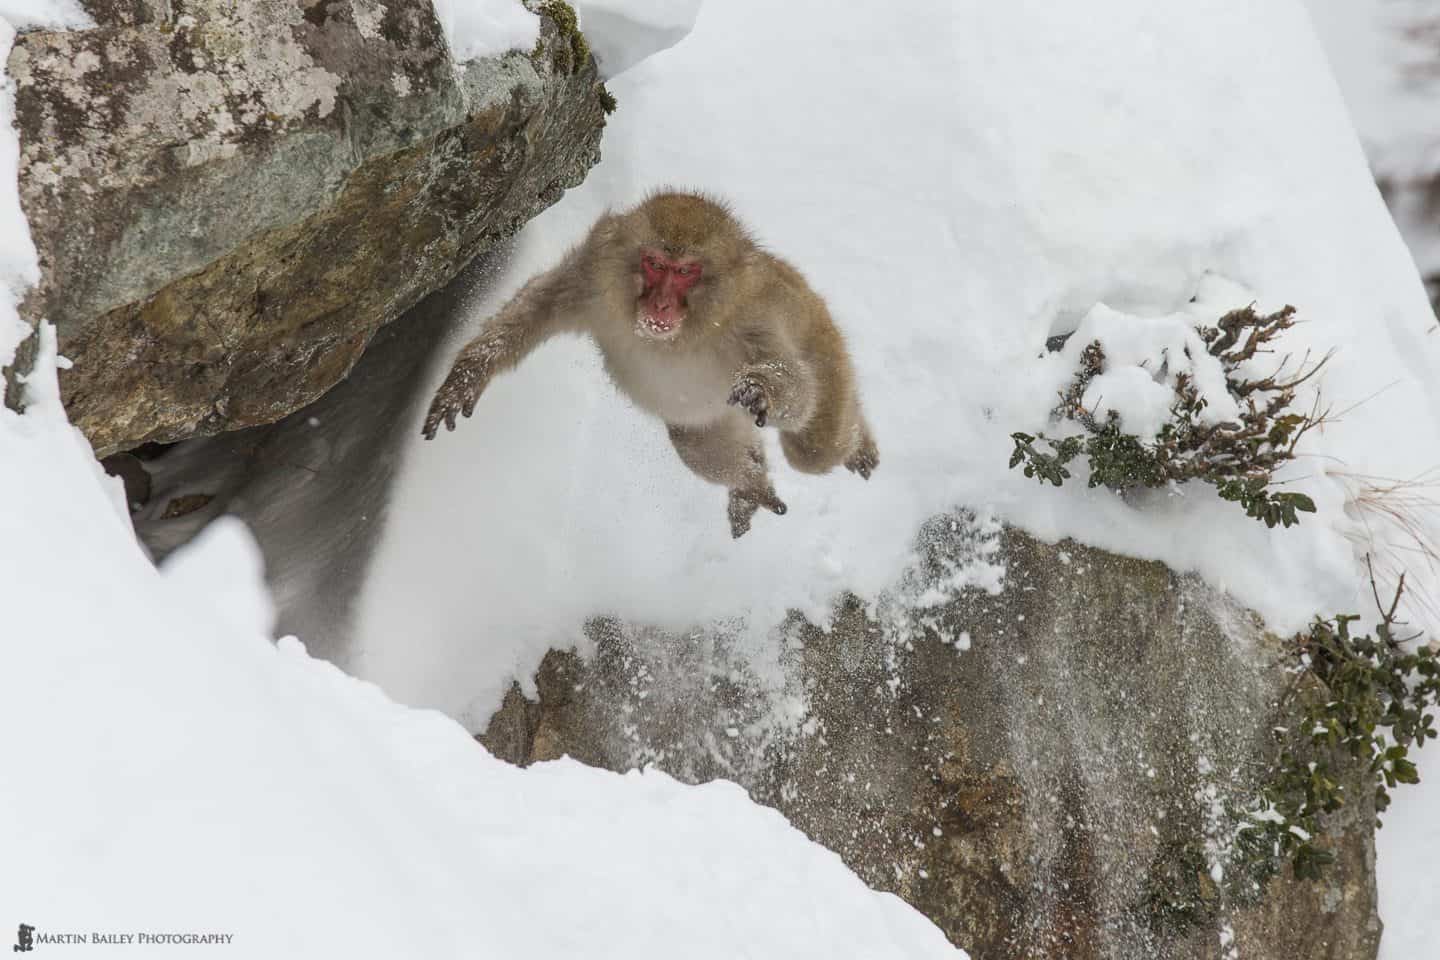 Leaping Snow Monkey